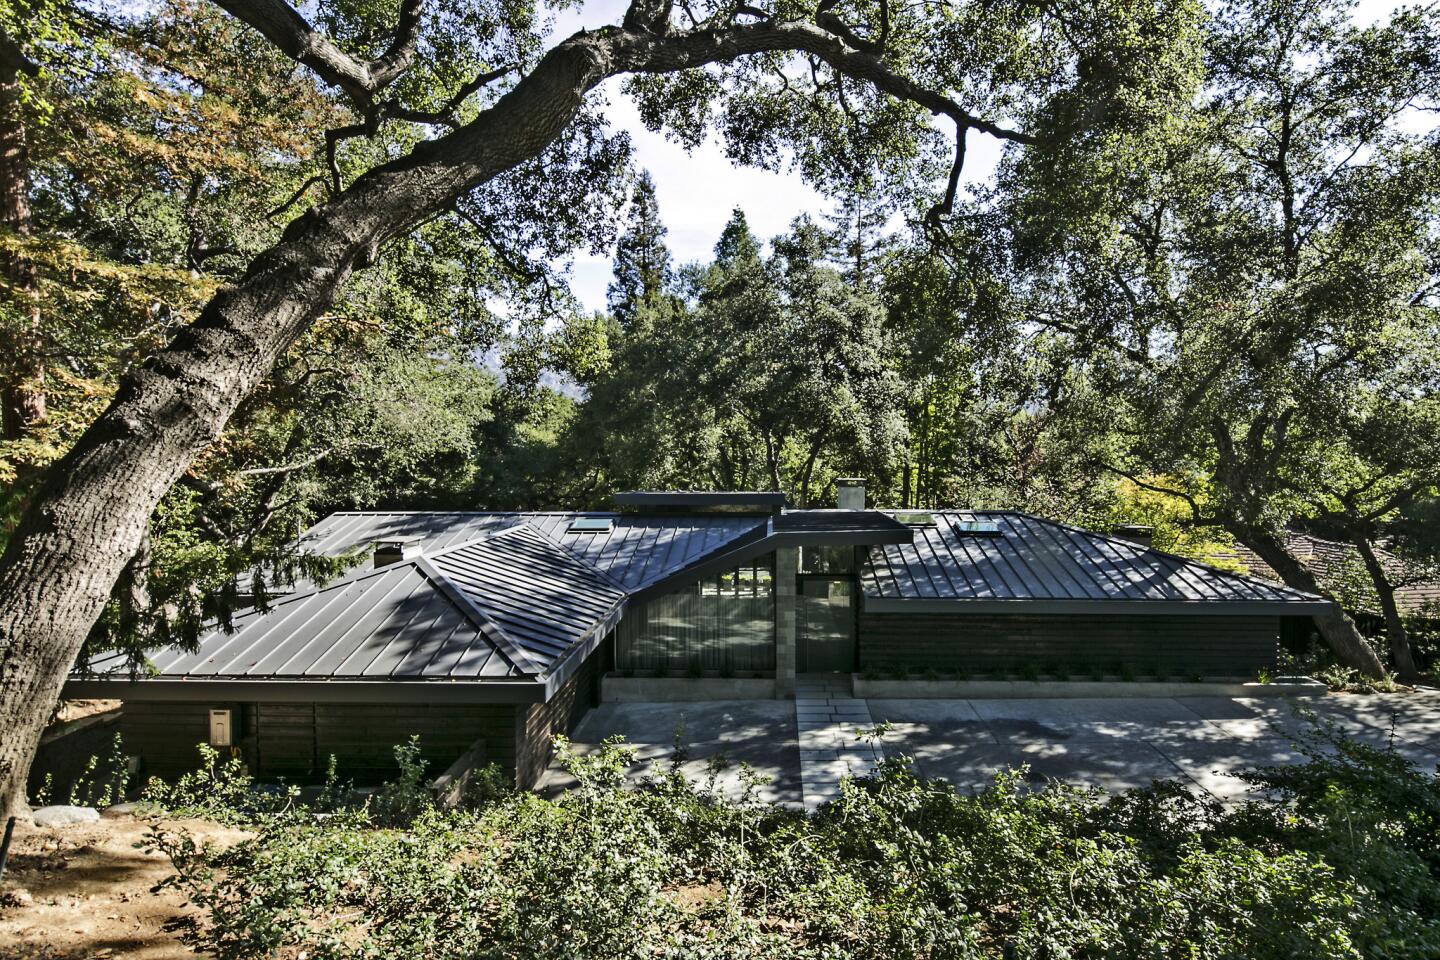 Sunnie Kim's midcentury home is set below street level and embraced by giant redwood, oak and maple trees.